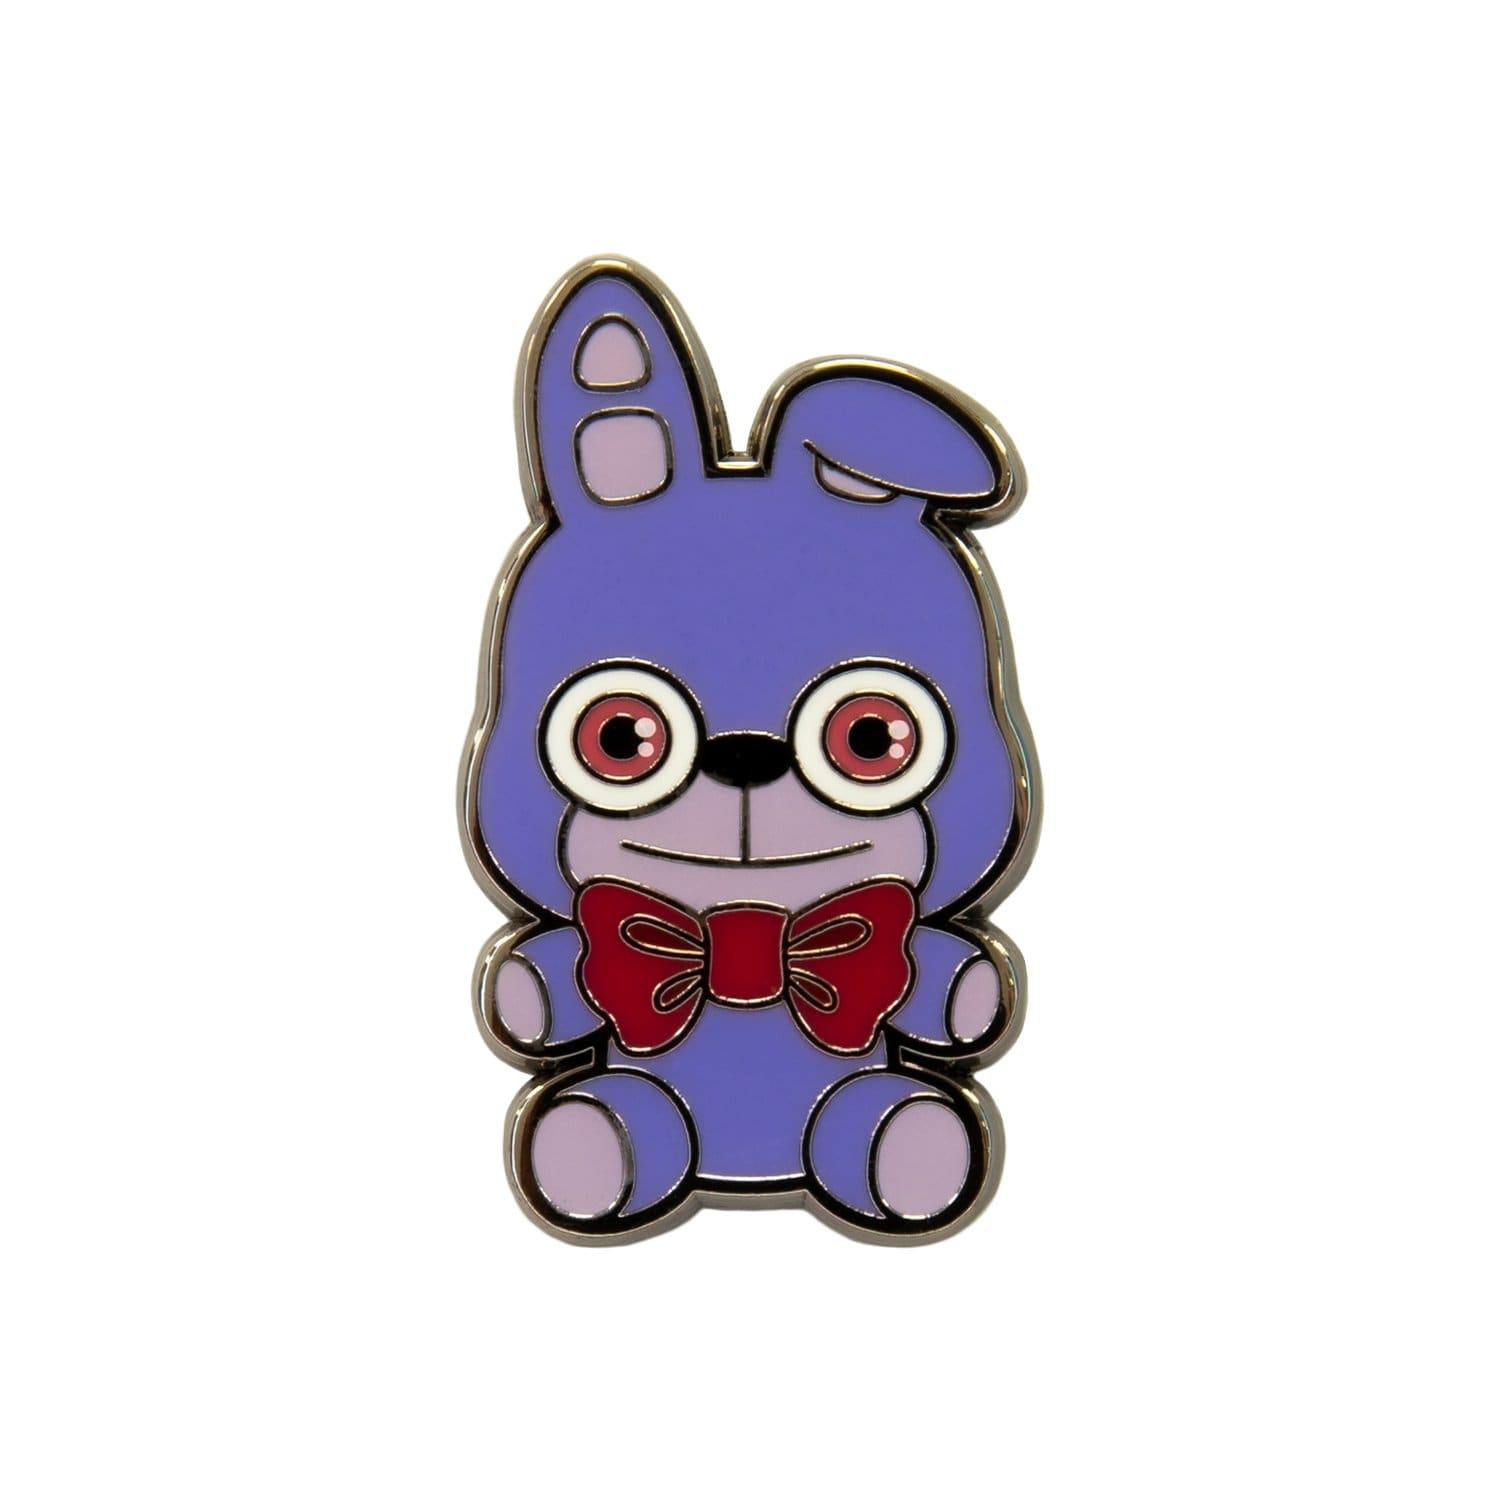 Five Nights At Freddy's - Bonnie Collector's Pin 🎸